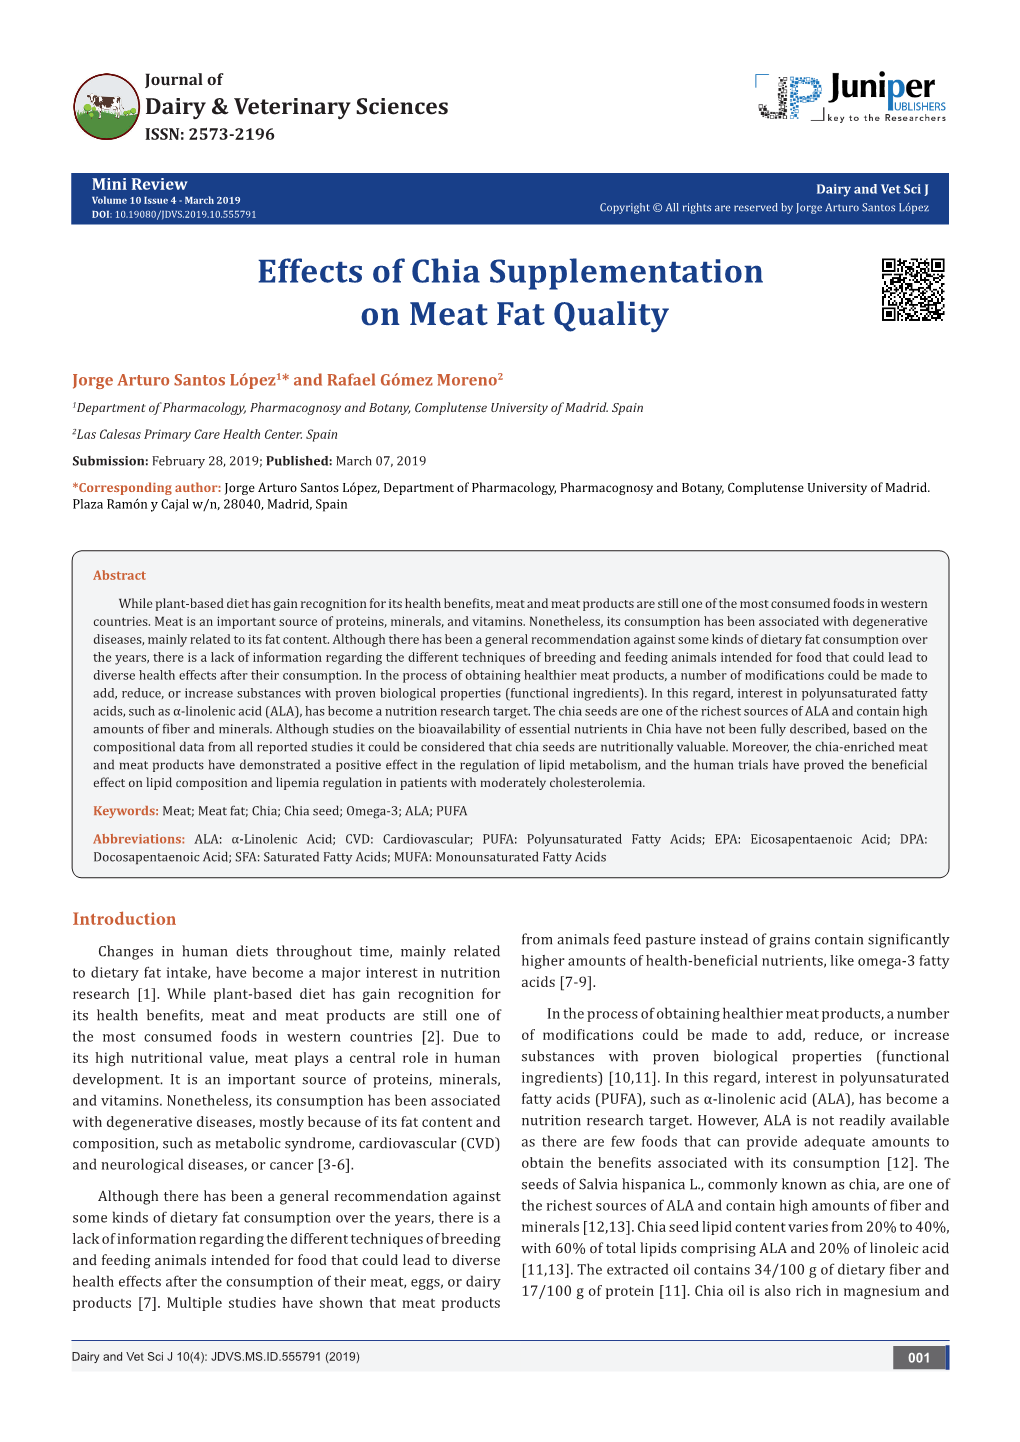 Effects of Chia Supplementation on Meat Fat Quality